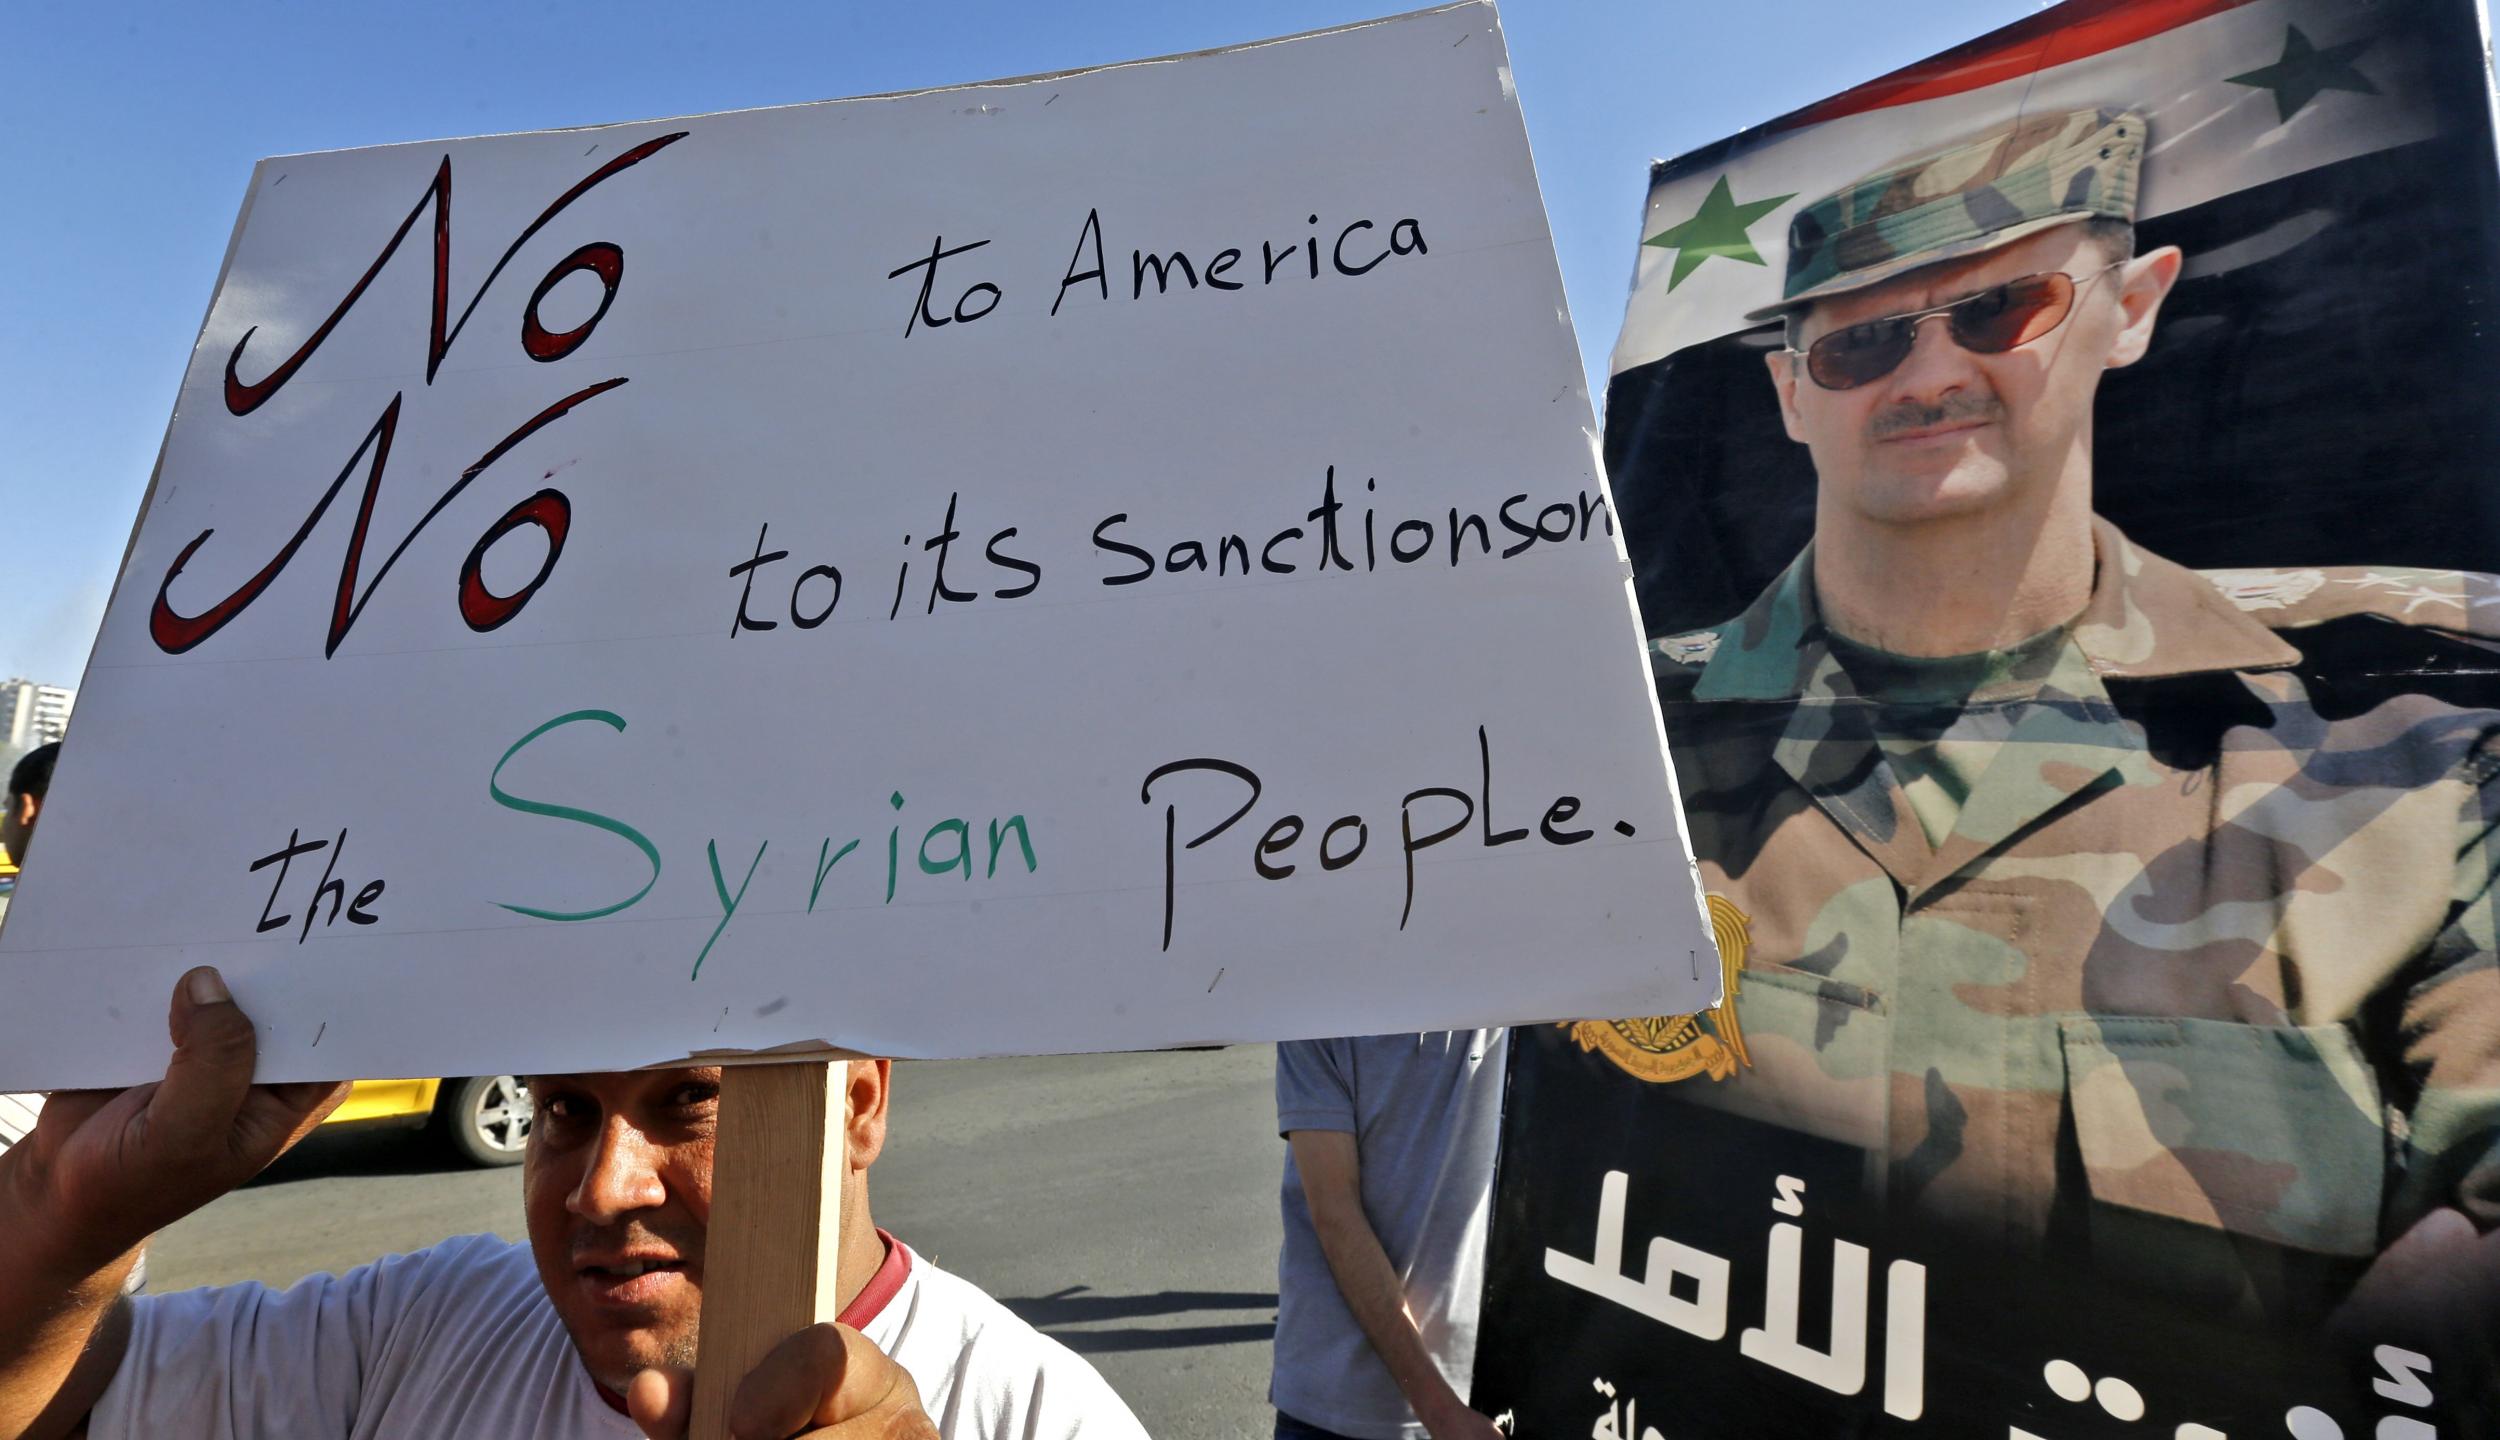 A man holds up a sign as he joins others gathering for a demonstration in support of Syria's President Bashar al-Assad and against US sanctions on the country, in the centre of the capital Damascus